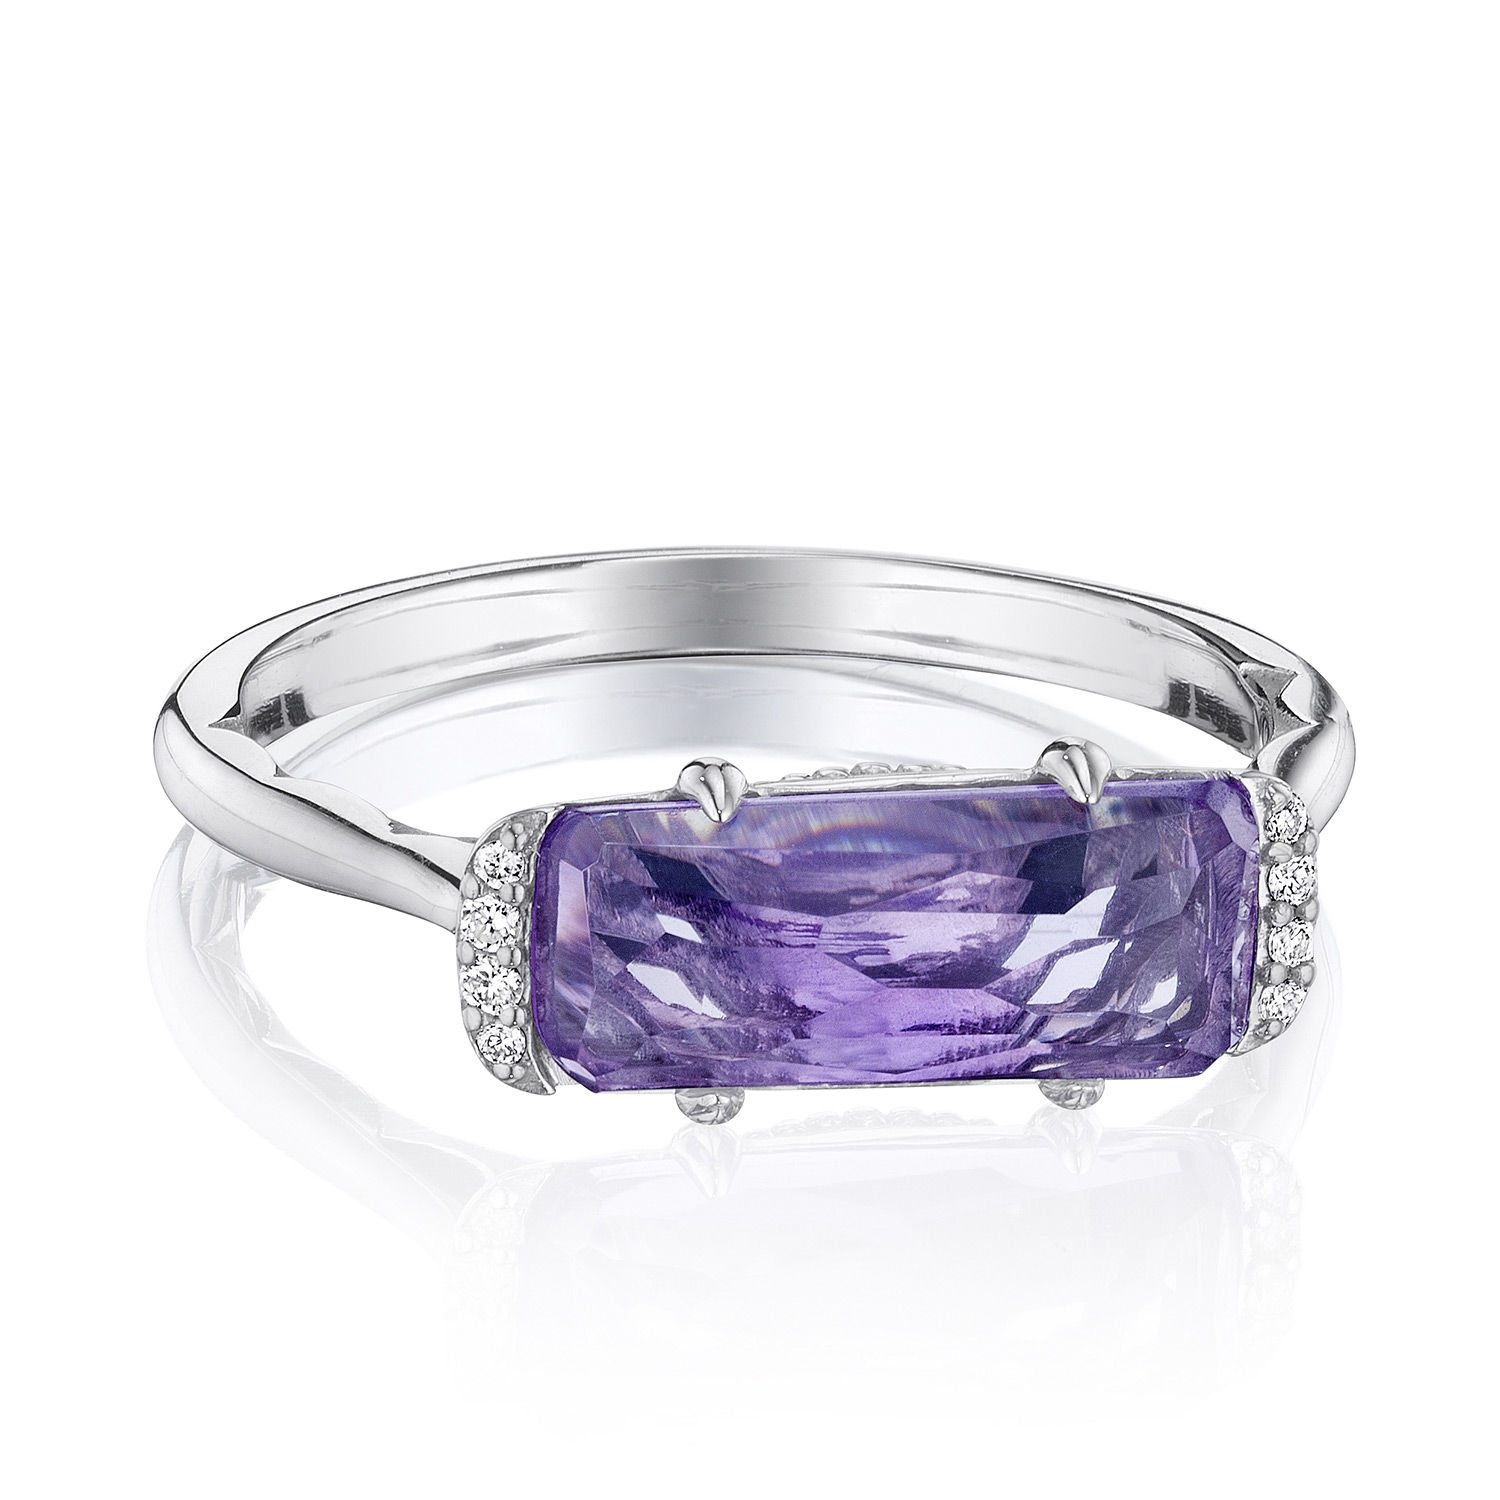 Tacori SR22401 Solitaire Emerald Cut Ring with Amethyst